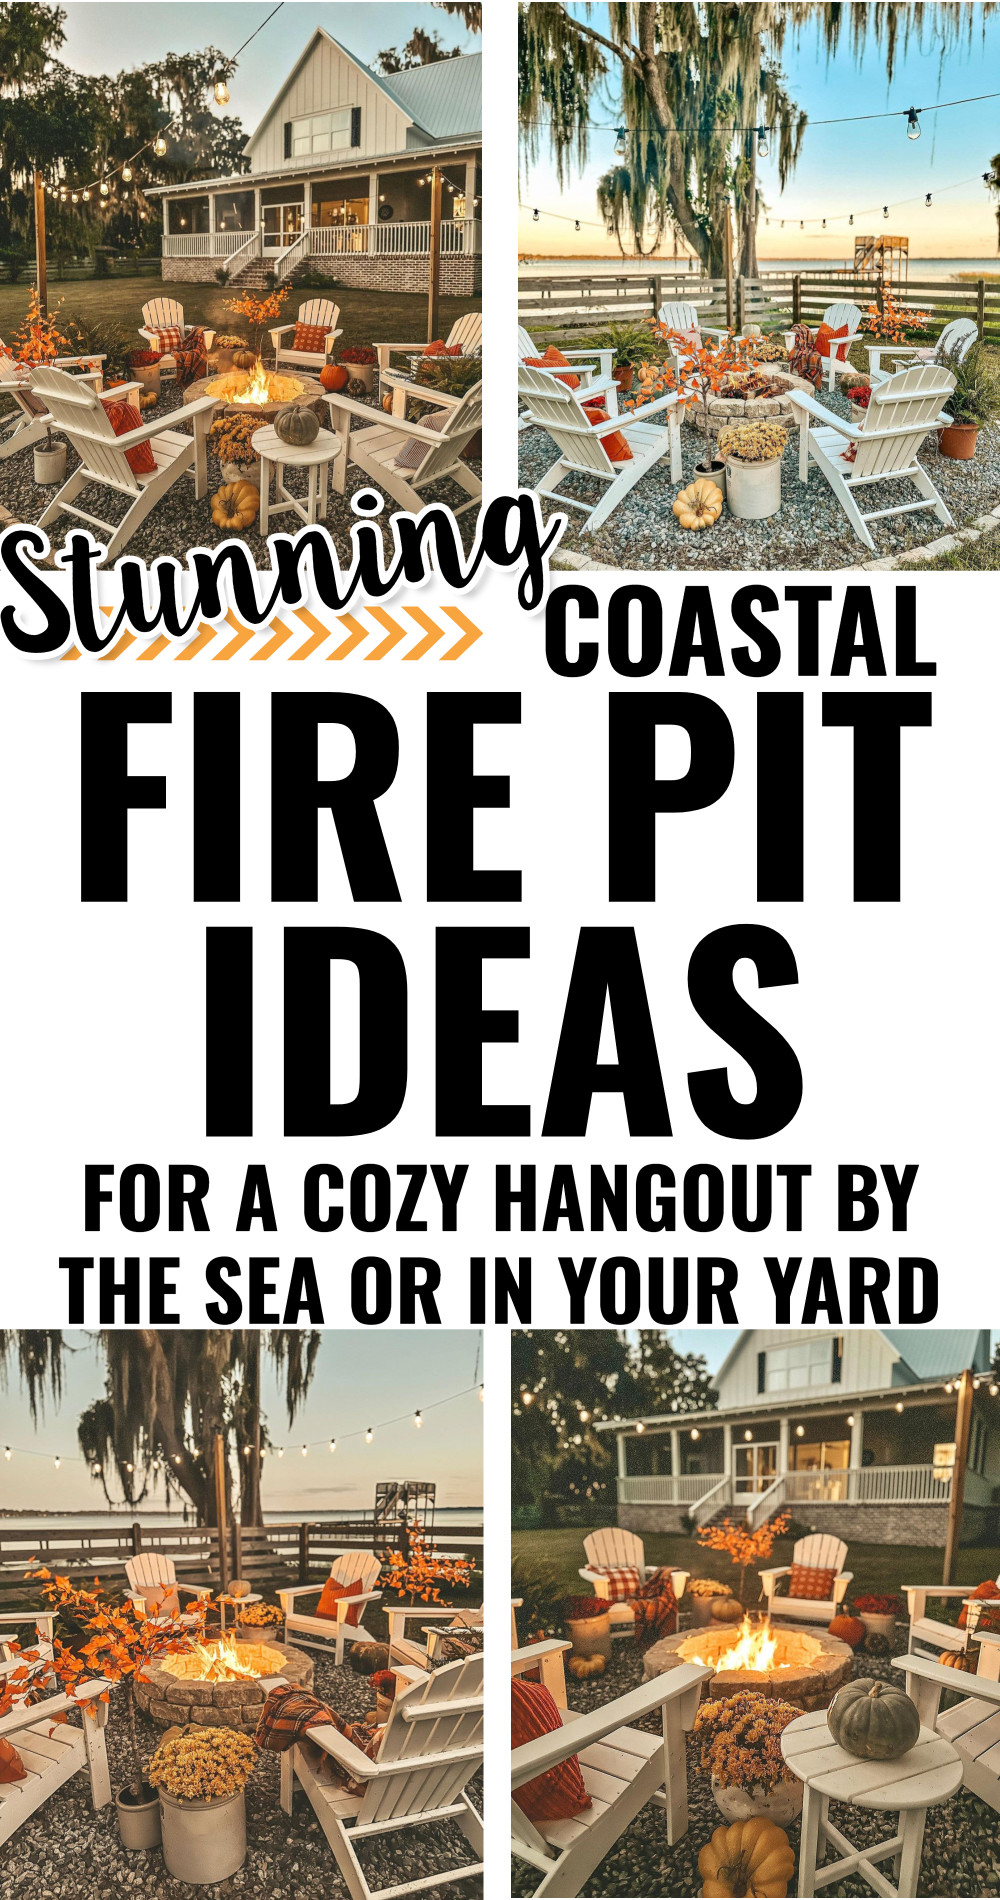 Stunning coastal fire pit ideas for a cozy hangout in your backyard or by the sea